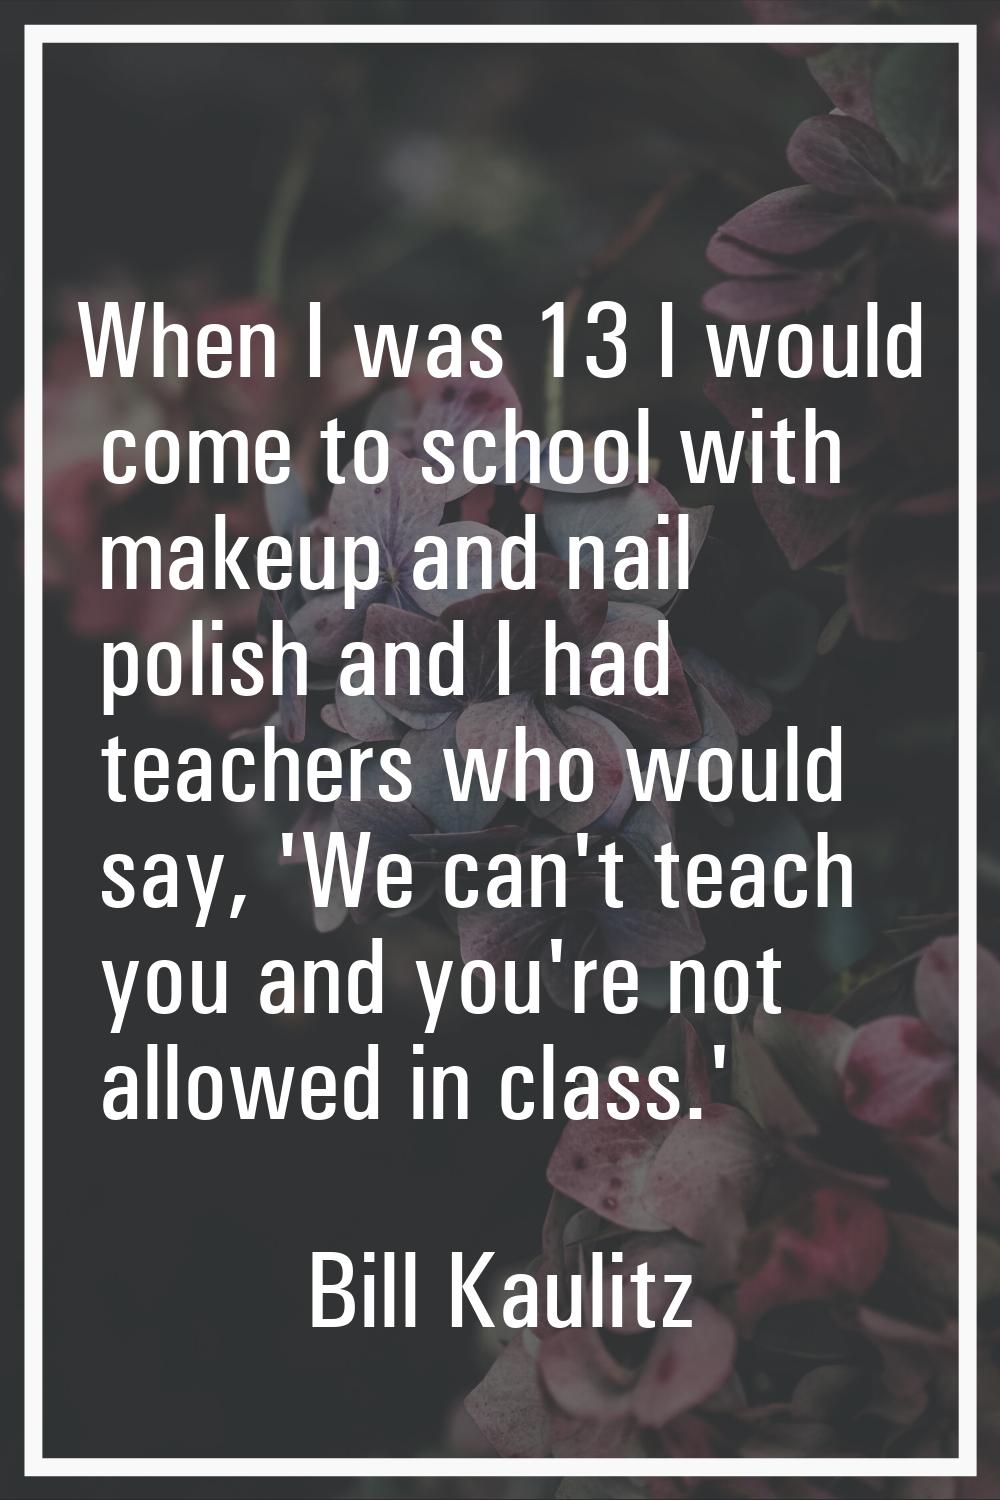 When I was 13 I would come to school with makeup and nail polish and I had teachers who would say, 